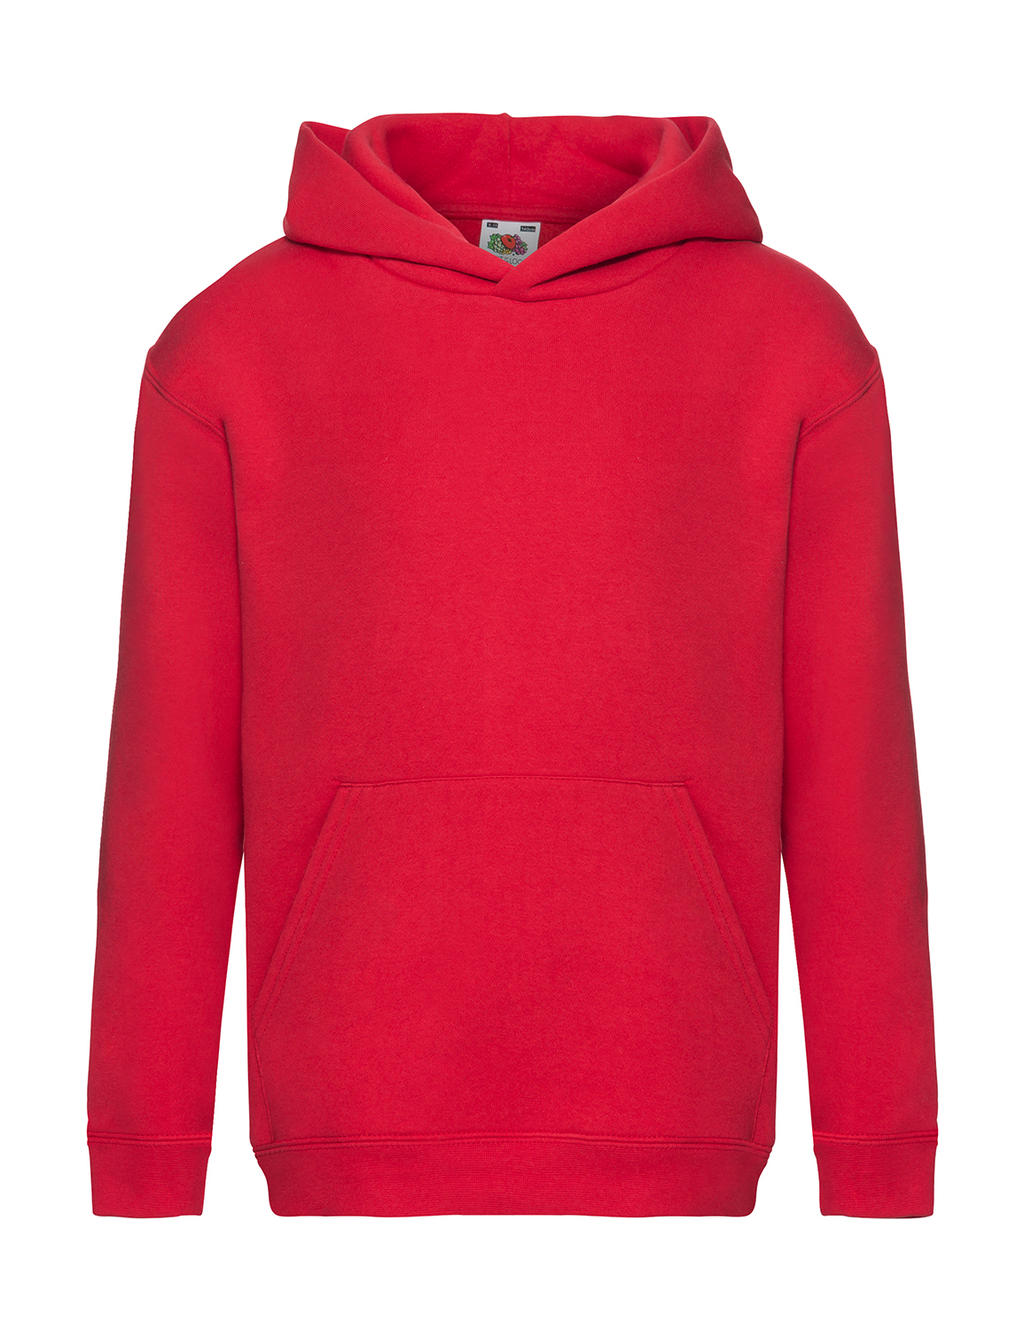  Kids Premium Hooded Sweat in Farbe Red